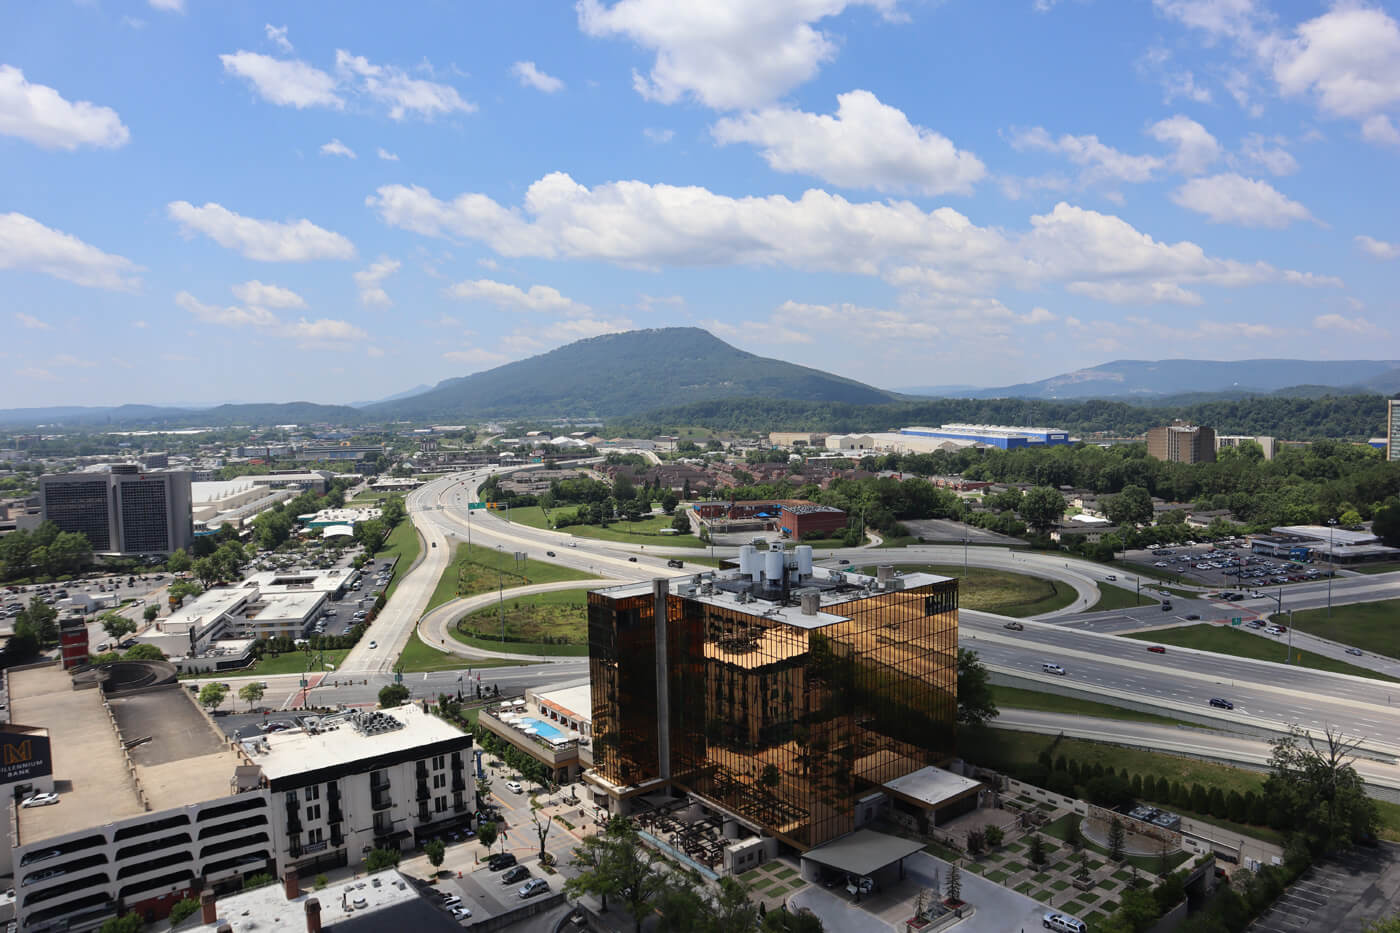 City view of downtown Chattanooga, Tennessee and Lookout Mountain